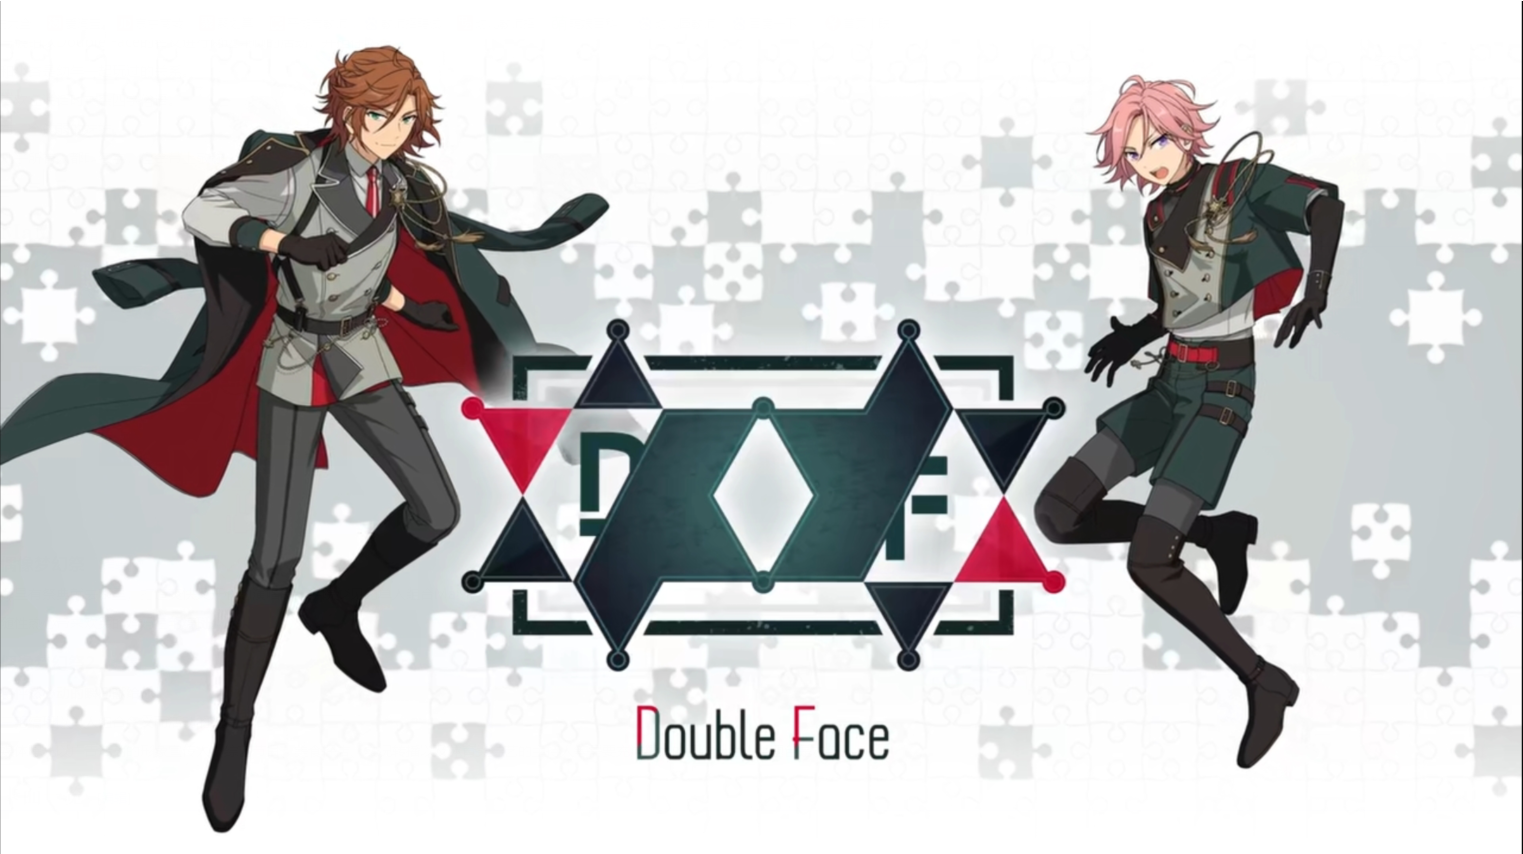 Double Face 公式.png